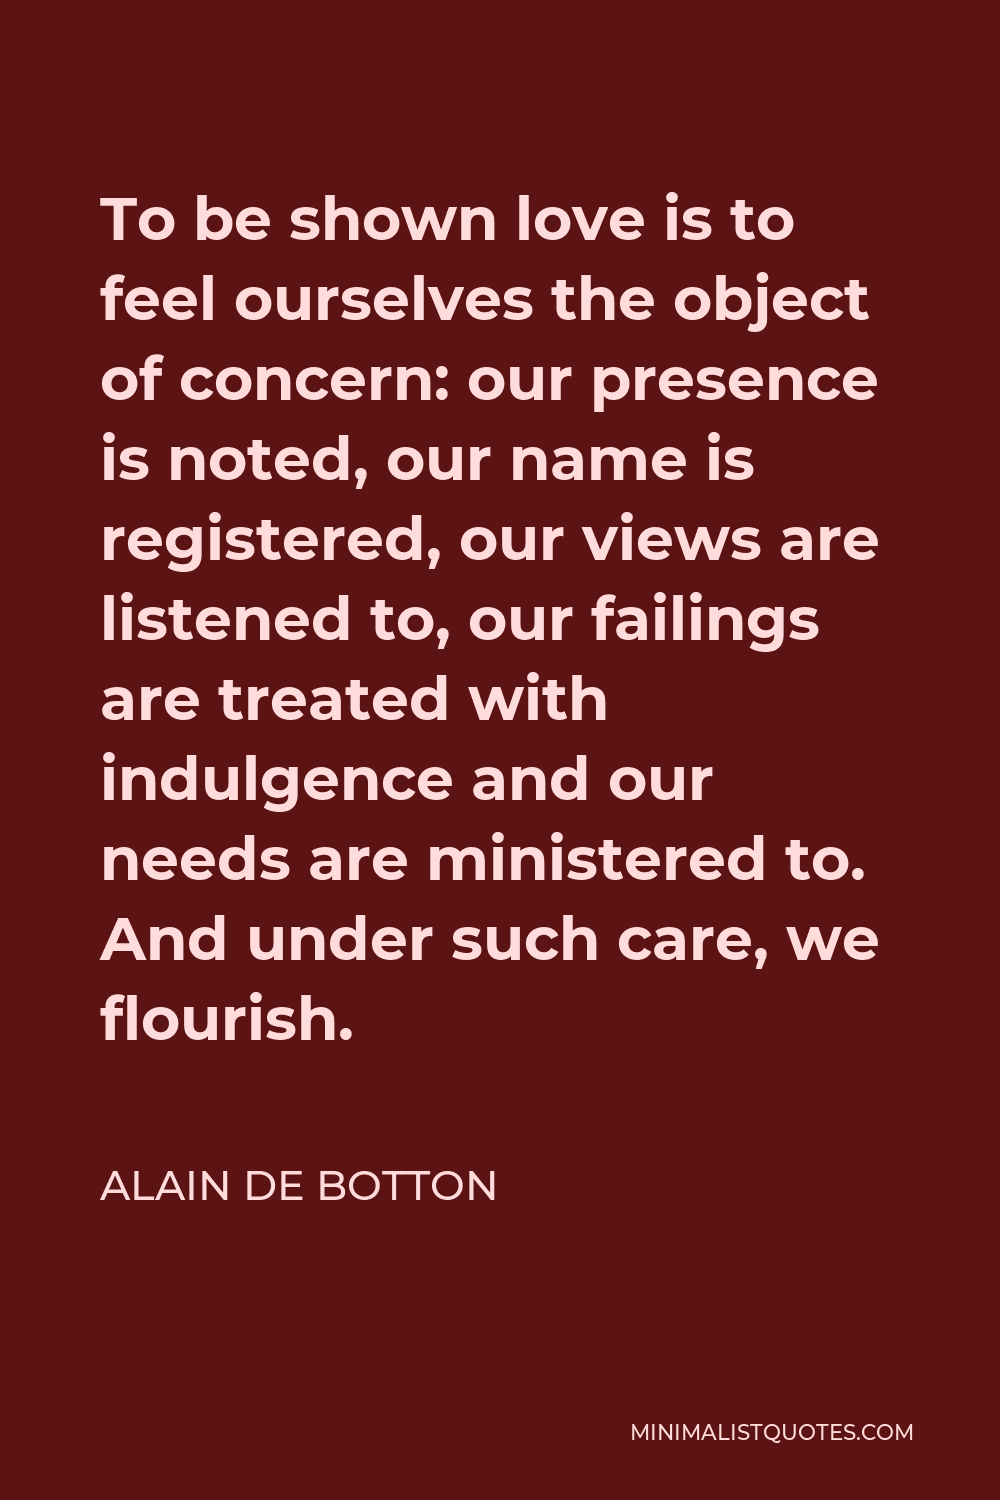 Alain de Botton Quote - To be shown love is to feel ourselves the object of concern: our presence is noted, our name is registered, our views are listened to, our failings are treated with indulgence and our needs are ministered to. And under such care, we flourish.